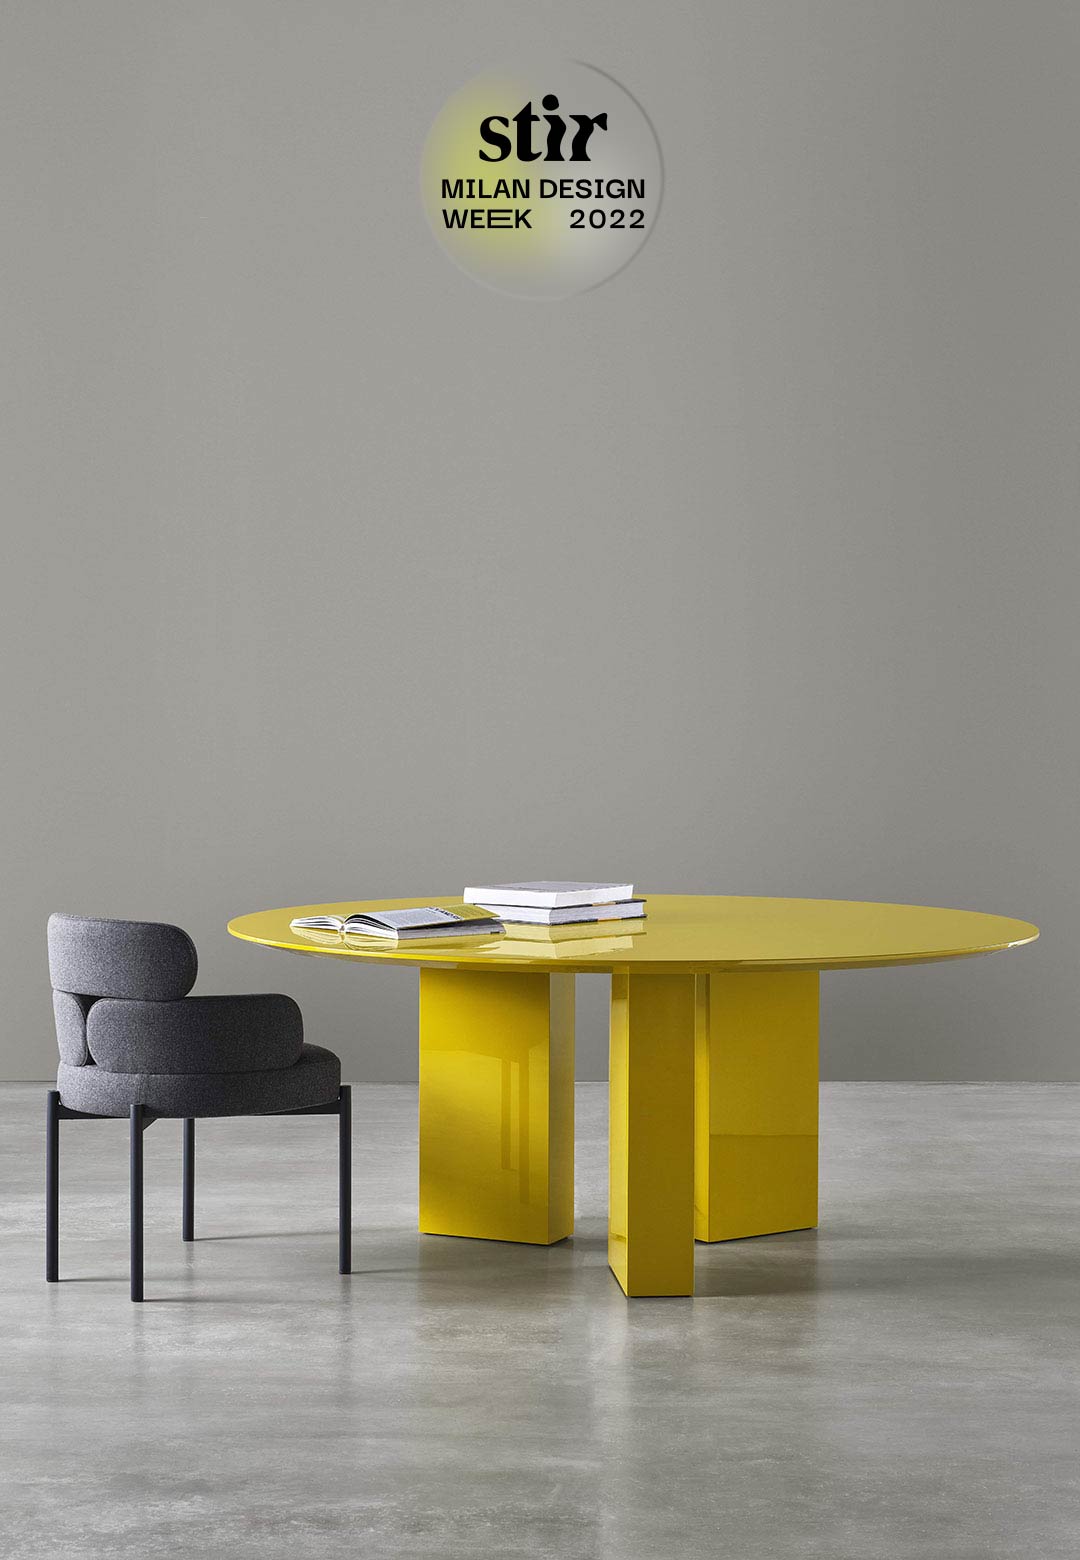 Meridiani unveils monolithic version of Plinto Table at Salone 2022